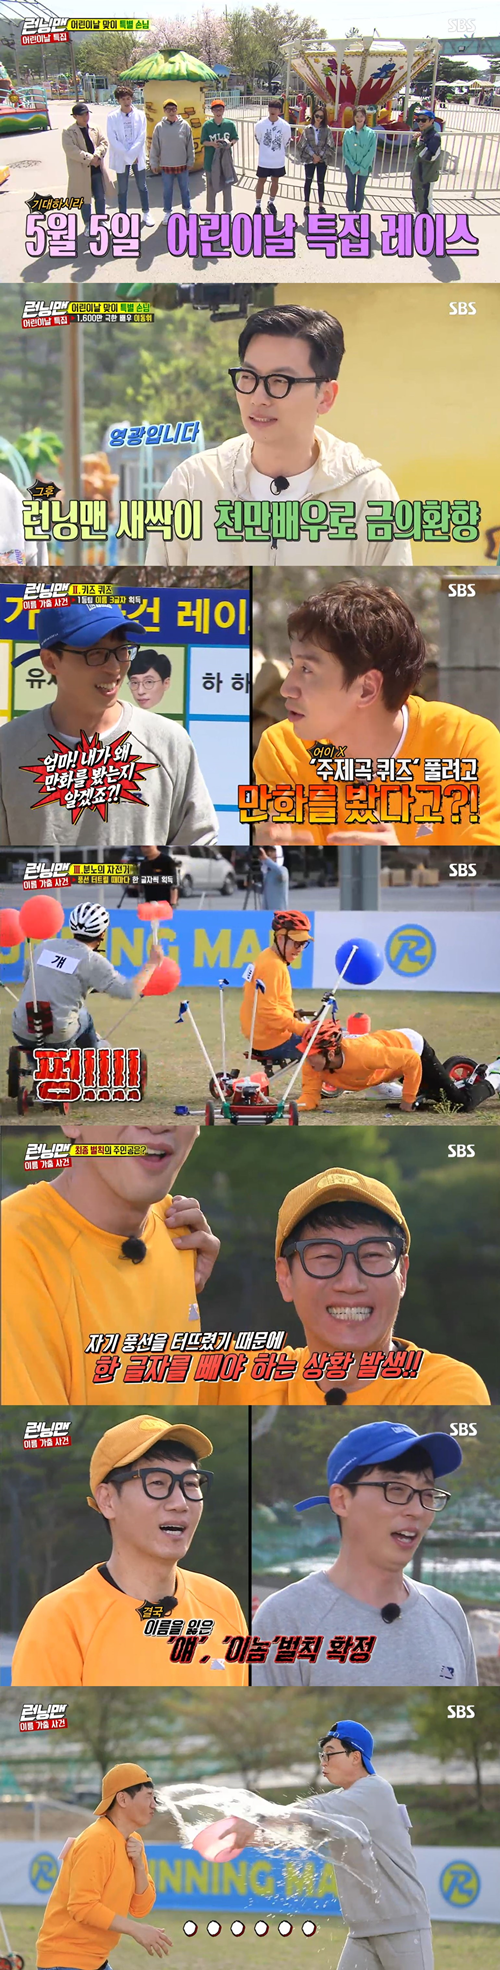 Running Man Yoo Jae-Suk and Ji Suk-jin became the main characters of Best 1 Minute.According to Nielsen Korea, a ratings agency on the 6th, the average audience rating of SBS entertainment program Running Man, which was broadcast on the 5th, was 4.2% in the first part and 5.9% in the second part (based on the audience rating of households in the metropolitan area).The highest audience rating per minute was 6.4 percent.On the same day, Running Man was decorated with the special Name Runaway Case Race on Childrens Day, and the members went to Game to regain the name tag with their name.Guests included Yi Dong-hwi, who was about to release the film Little Clients; Father Avengers Ji Suk-jin, Yoo Jae-Suk and Haha became team leaders.The Ji Suk-jin team was teamed by Lee Kwang-soo and Song Ji-hyoga, the Yoo Jae-Suk team was teamed by Yi Dong-hwi and Yang Se-chan, and the Haha team was teamed by Jeon So-min and Kim Jong-kook.Since then, a full-scale race has begun.The first game was an age of memories that the first team could acquire four letters of name, and the second was a Kids Quiz, where the first team could acquire three letters of name.The last mission is a tump-bump bike that can find the name as needed. Every time you ride a bicycle and burst the balloon of your opponent, you get one letter.In the first half, the ace Kim Jong-kooks performance led to the victory of the small teams (Kim Jong-kook, Haha and Jeon So-min) and the remaining two teams in the second half.Lee Kwang-soos baby tricycle failed to beat the weight and broke two dongs, and the same team Yi Dong-hwi was in crisis because only one remaining balloon remained.Eventually, the race ended with Yang Se-chan bursting Lee Kwang-soos remaining balloon.As Yoo Jae-Suk found Seok, Ji Suk-jin also found all the names, but Ji Suk-jin had to take one out at the end of his balloon.Lee Kwang-soo, who won the scissors rock, took out the stone and Ji Suk-jin and Yoo Jae-Suk, who were not completed, were punished.The scene recorded the highest audience rating of 6.4% per minute, accounting for the best one minute.